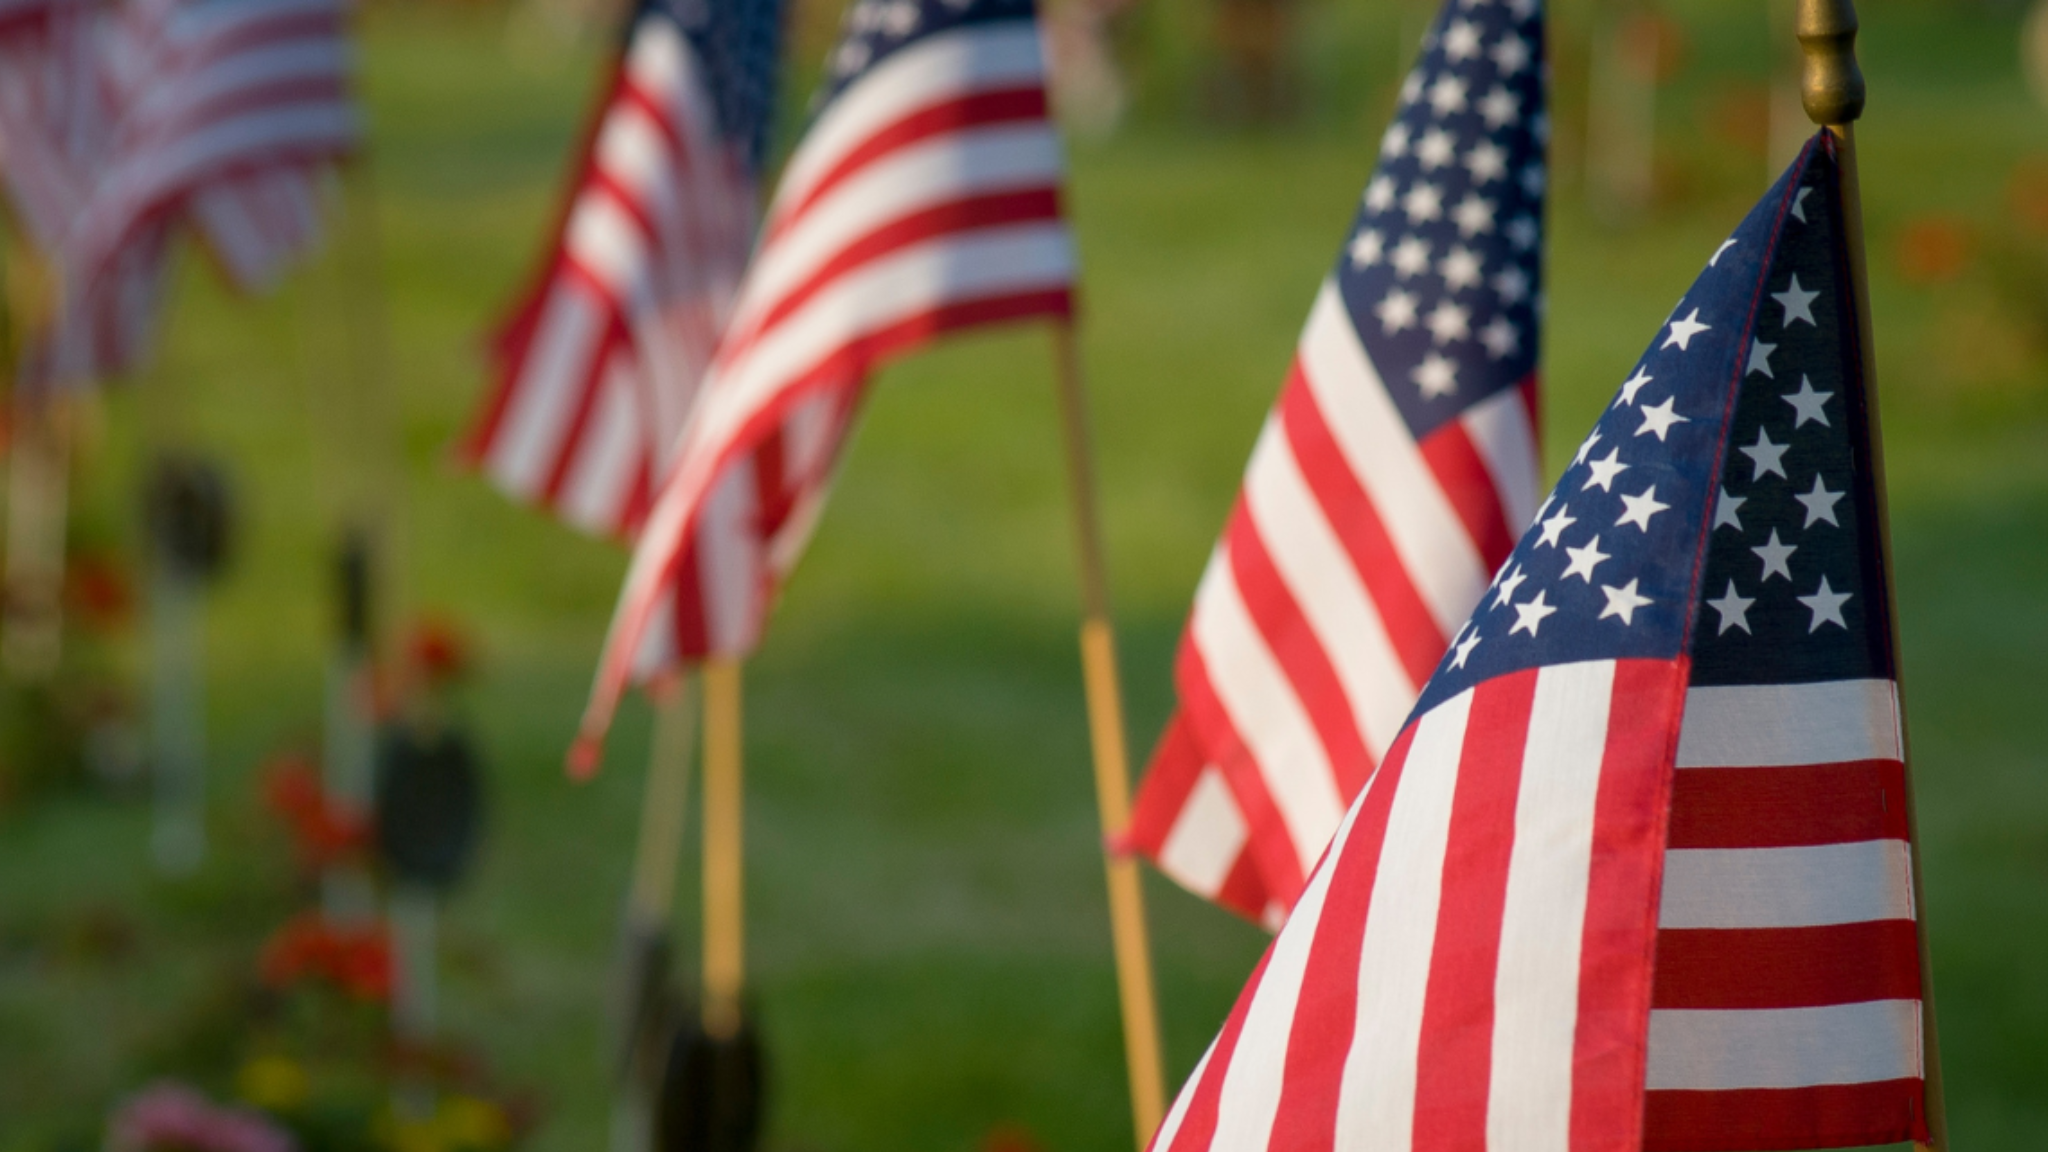 National Flag Day: Comcast’s Veteran’s Flag Replacement Program Comes to California